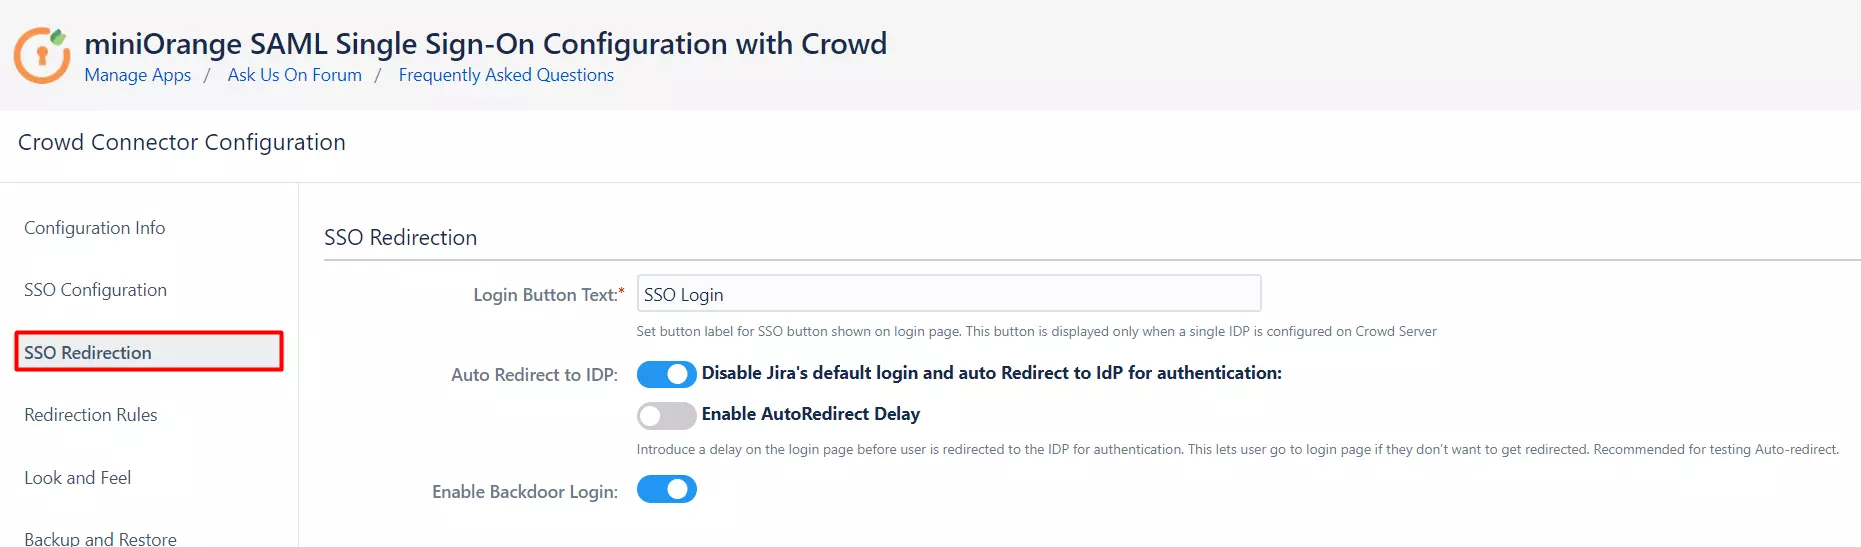 SAML Single Sign On (SSO) Connector for Crowd and Jira, SSO Redirection